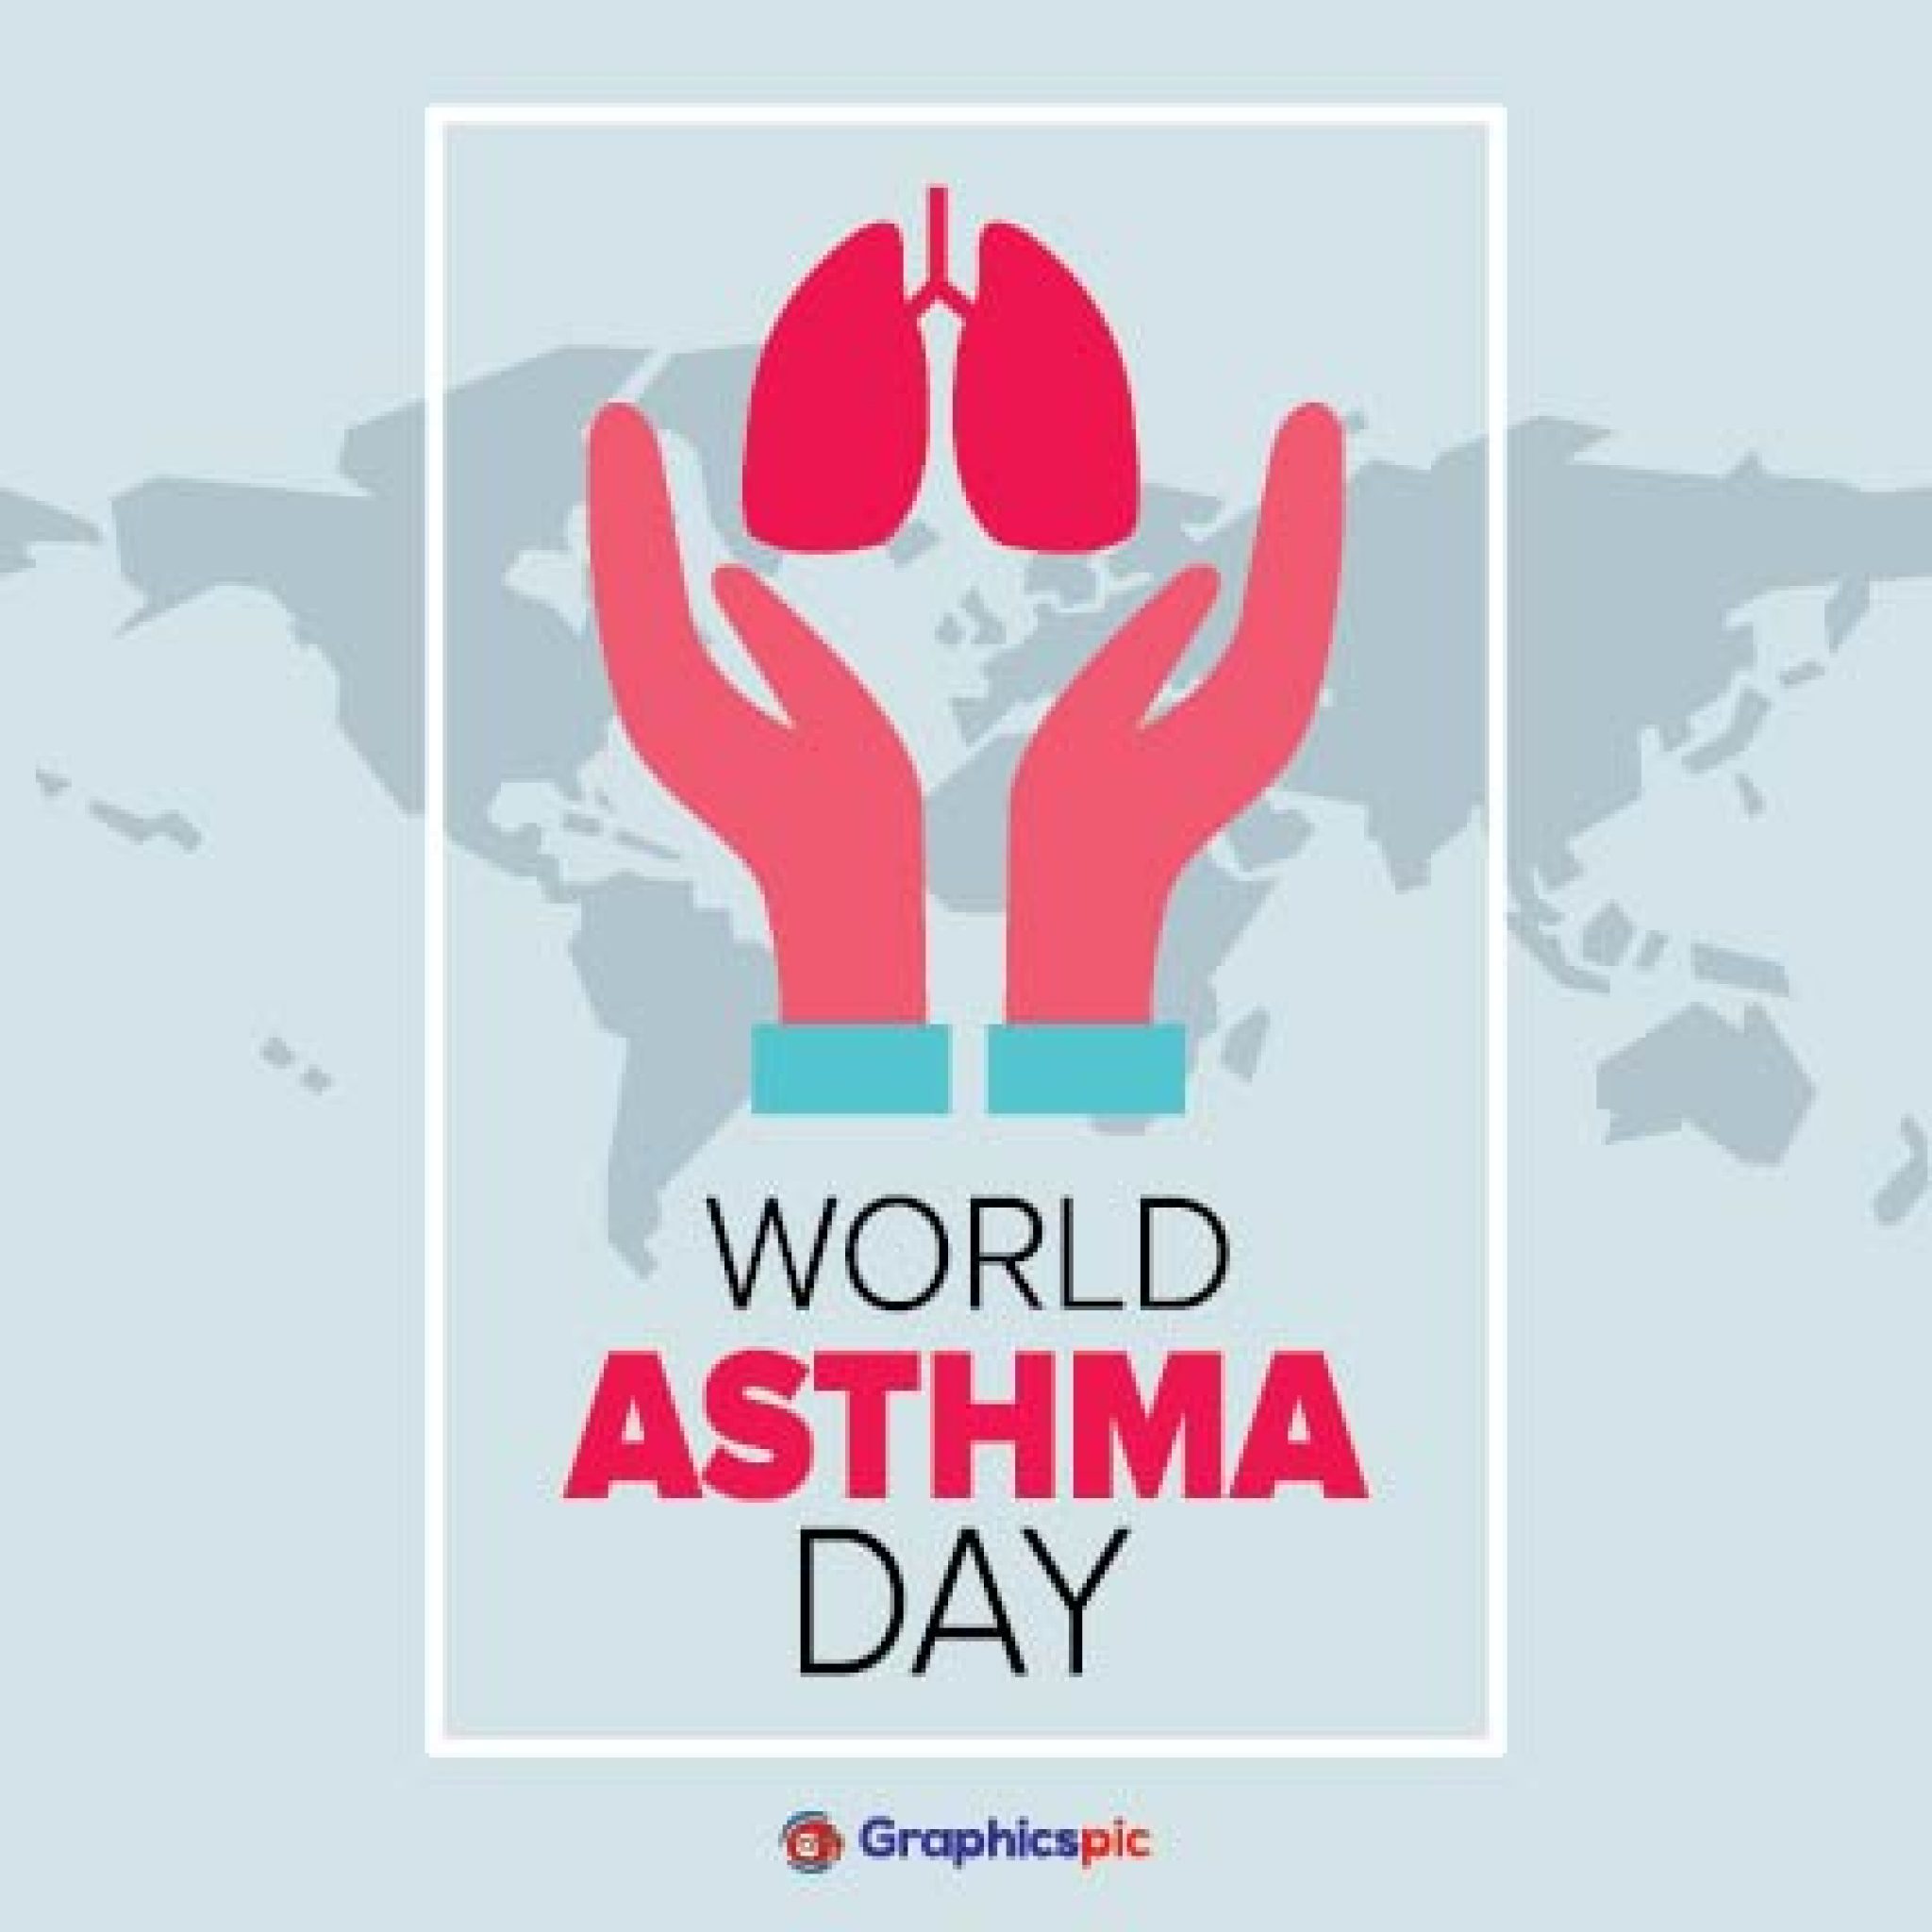 World asthma day Stock Photos, Graphics, Vectors, Illustrations, Icons & png Graphics Pic